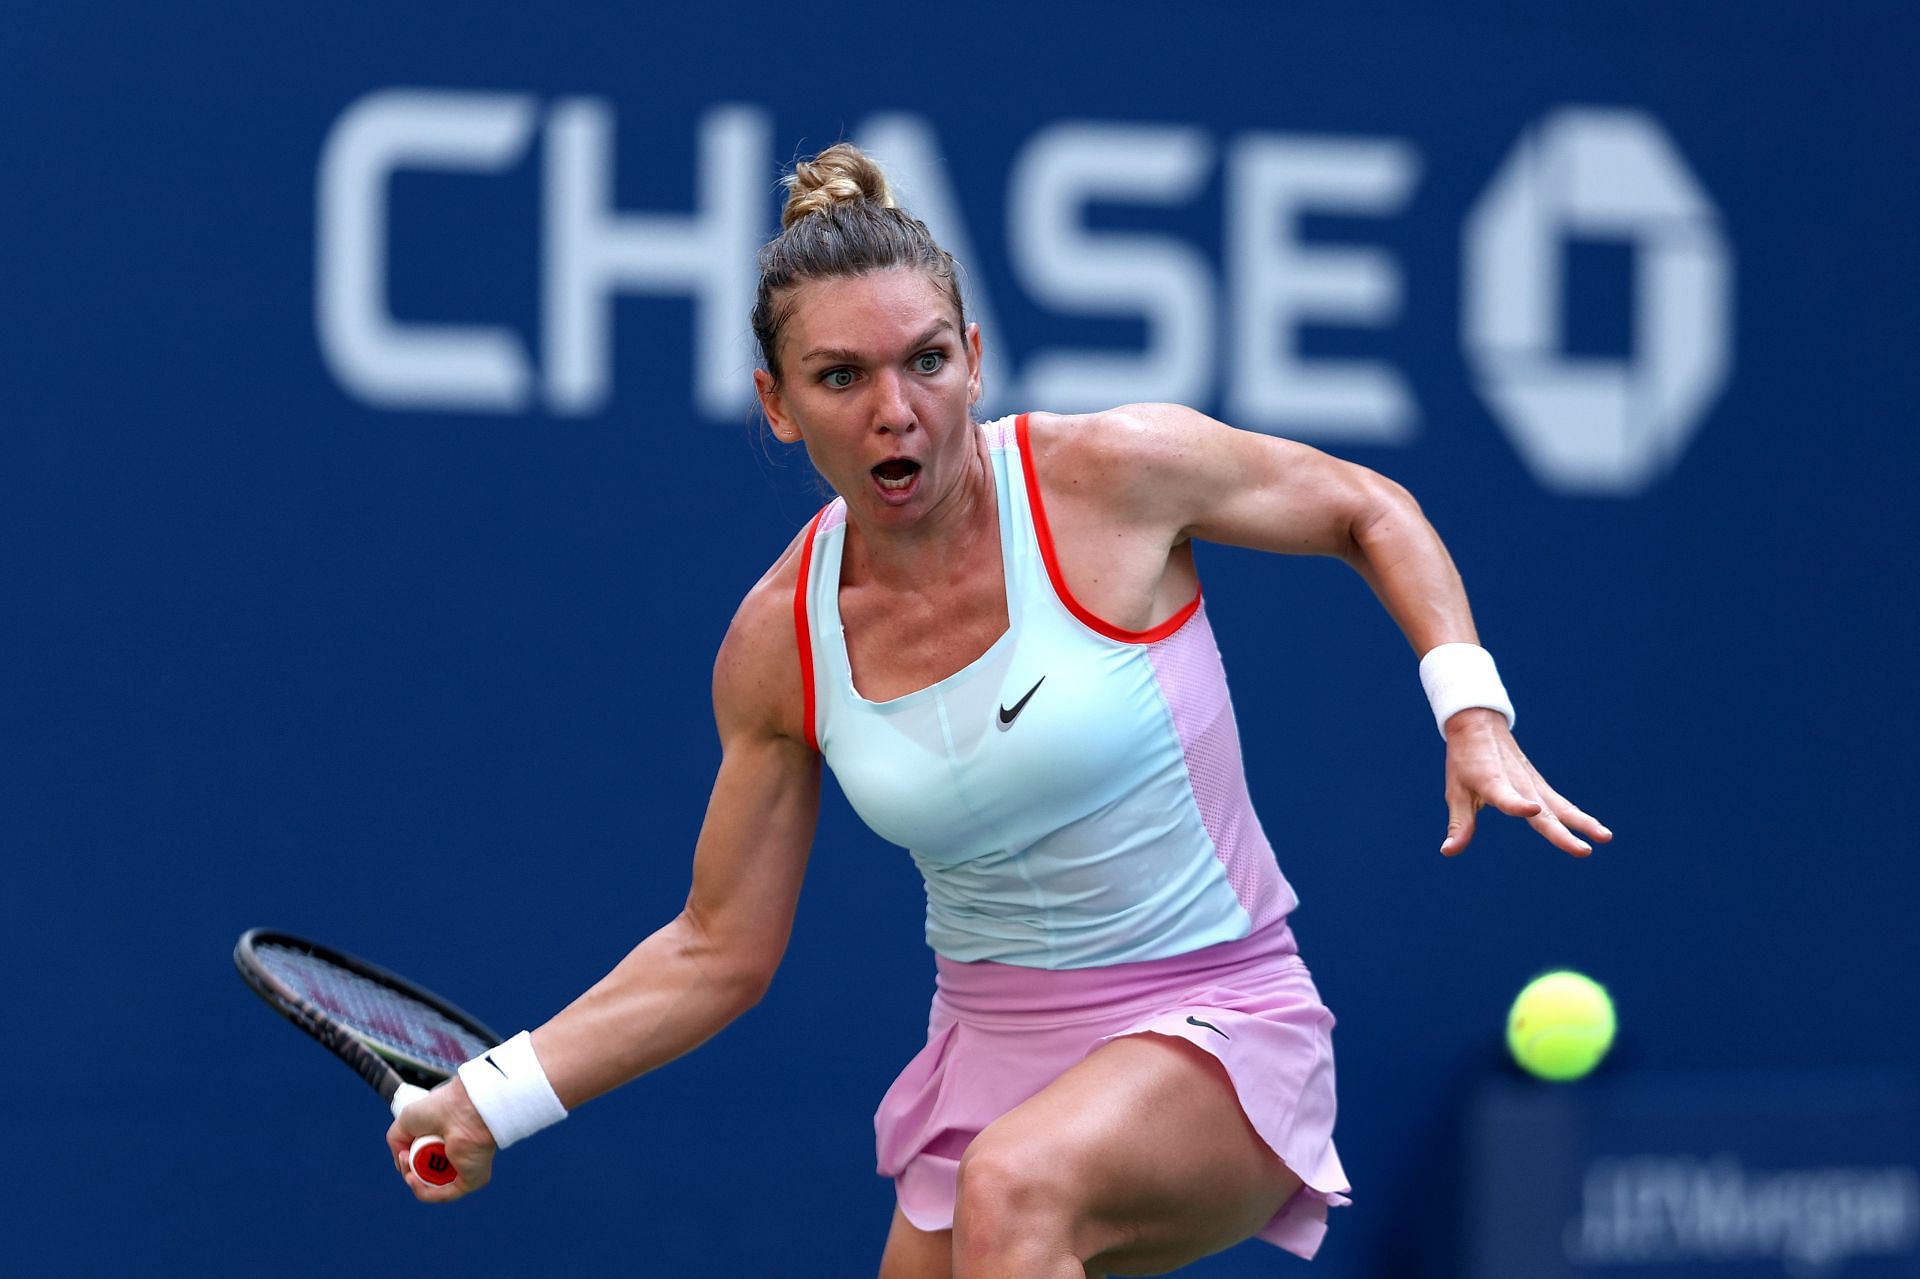 Simona Halep fell in the US Open first round once again.